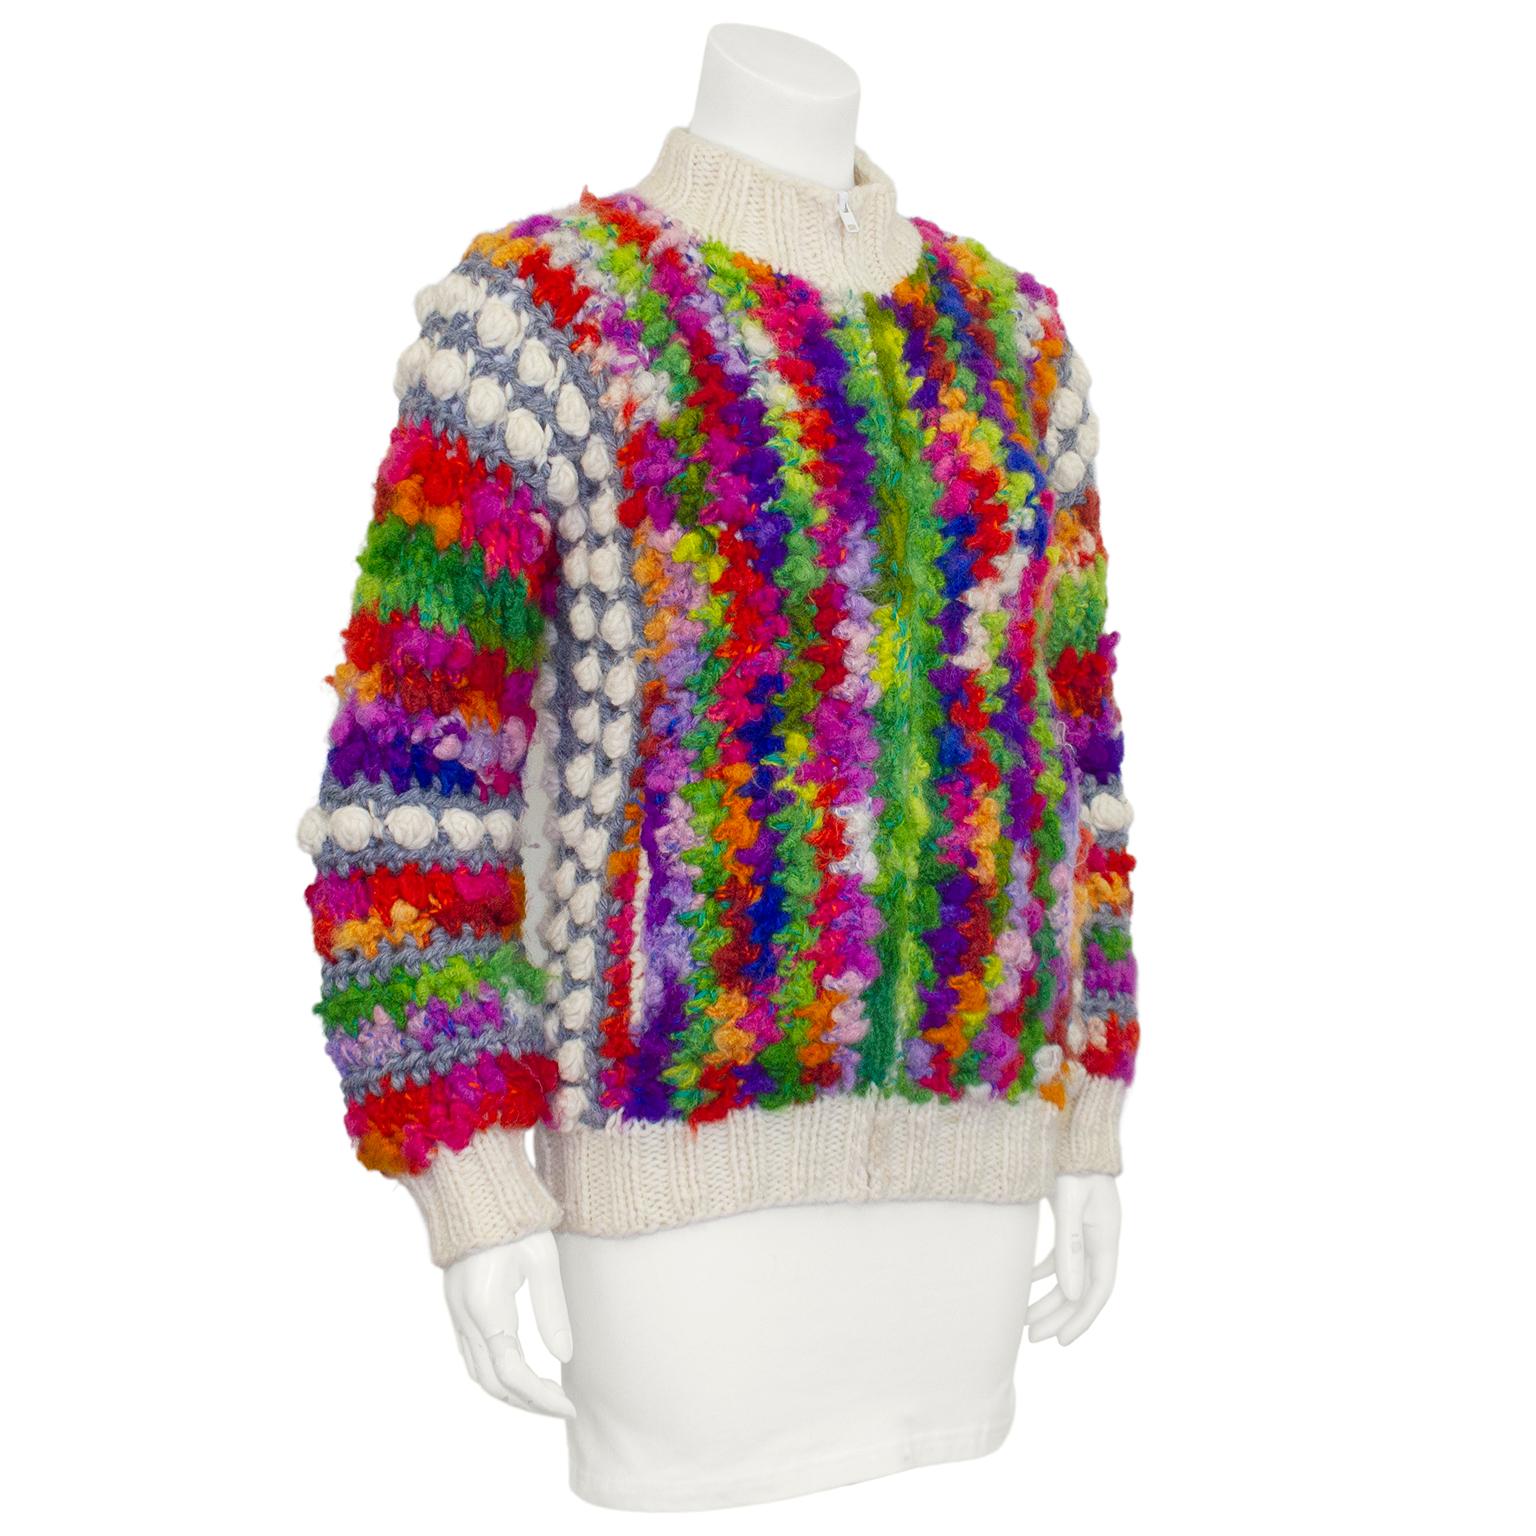 Cute, colorful and cozy hand knit rainbow colored bomber jacket and matching hat by Norma of Canada knits. Her boutiques were well known destinations for savvy international shoppers in Toronto and Calgary during the 1960's and 70's. Her creations